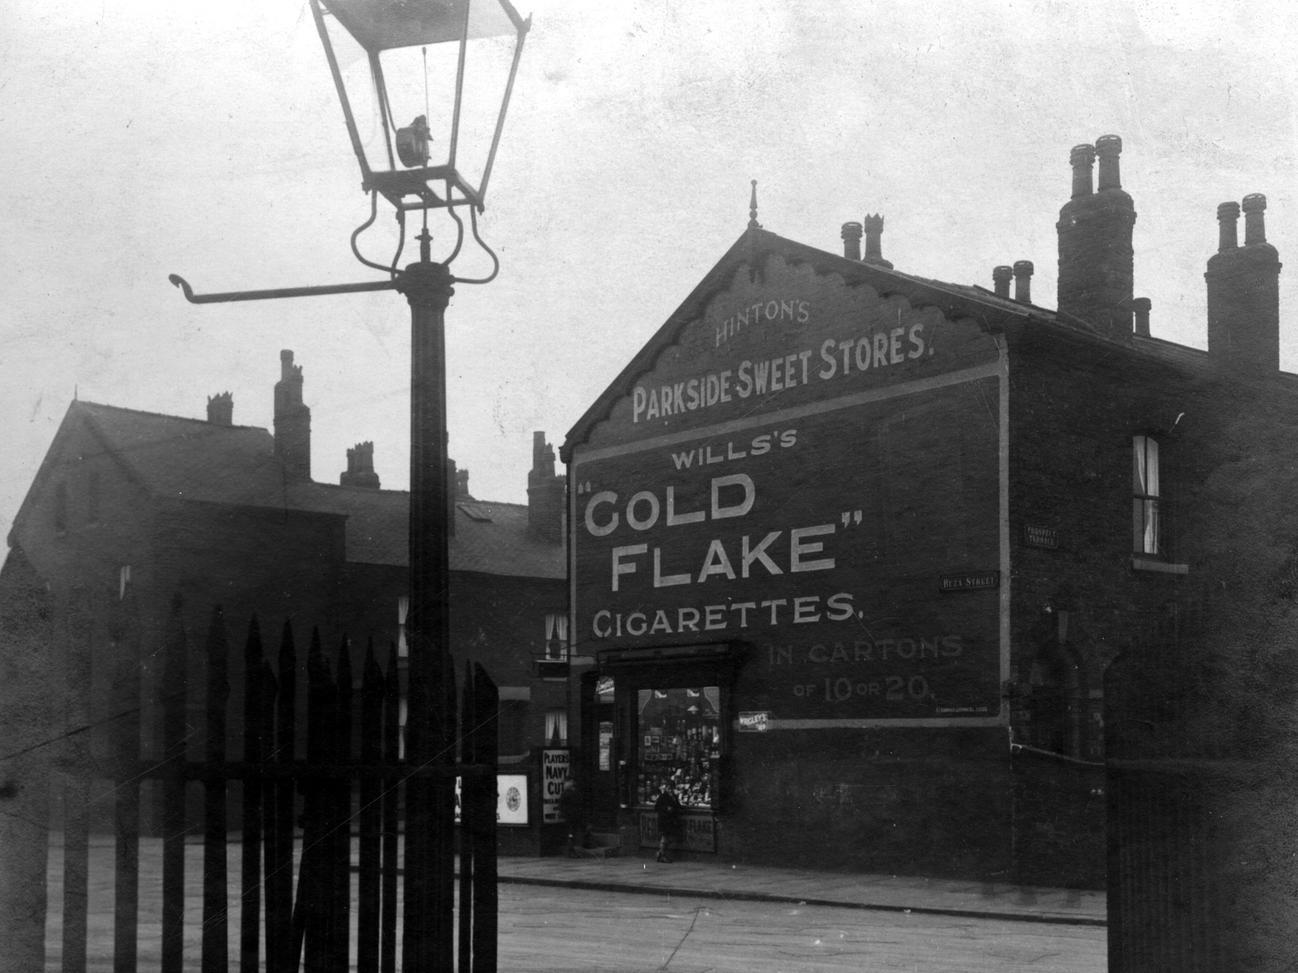 This photo shows Hunslet Moor railway crossing on Beza Street. Number 48 Parkside sweet stores is opposite with a large advertisement for Wills Gold Flake cigarettes above. Prospect Street and Prospect Terrace are partially visible